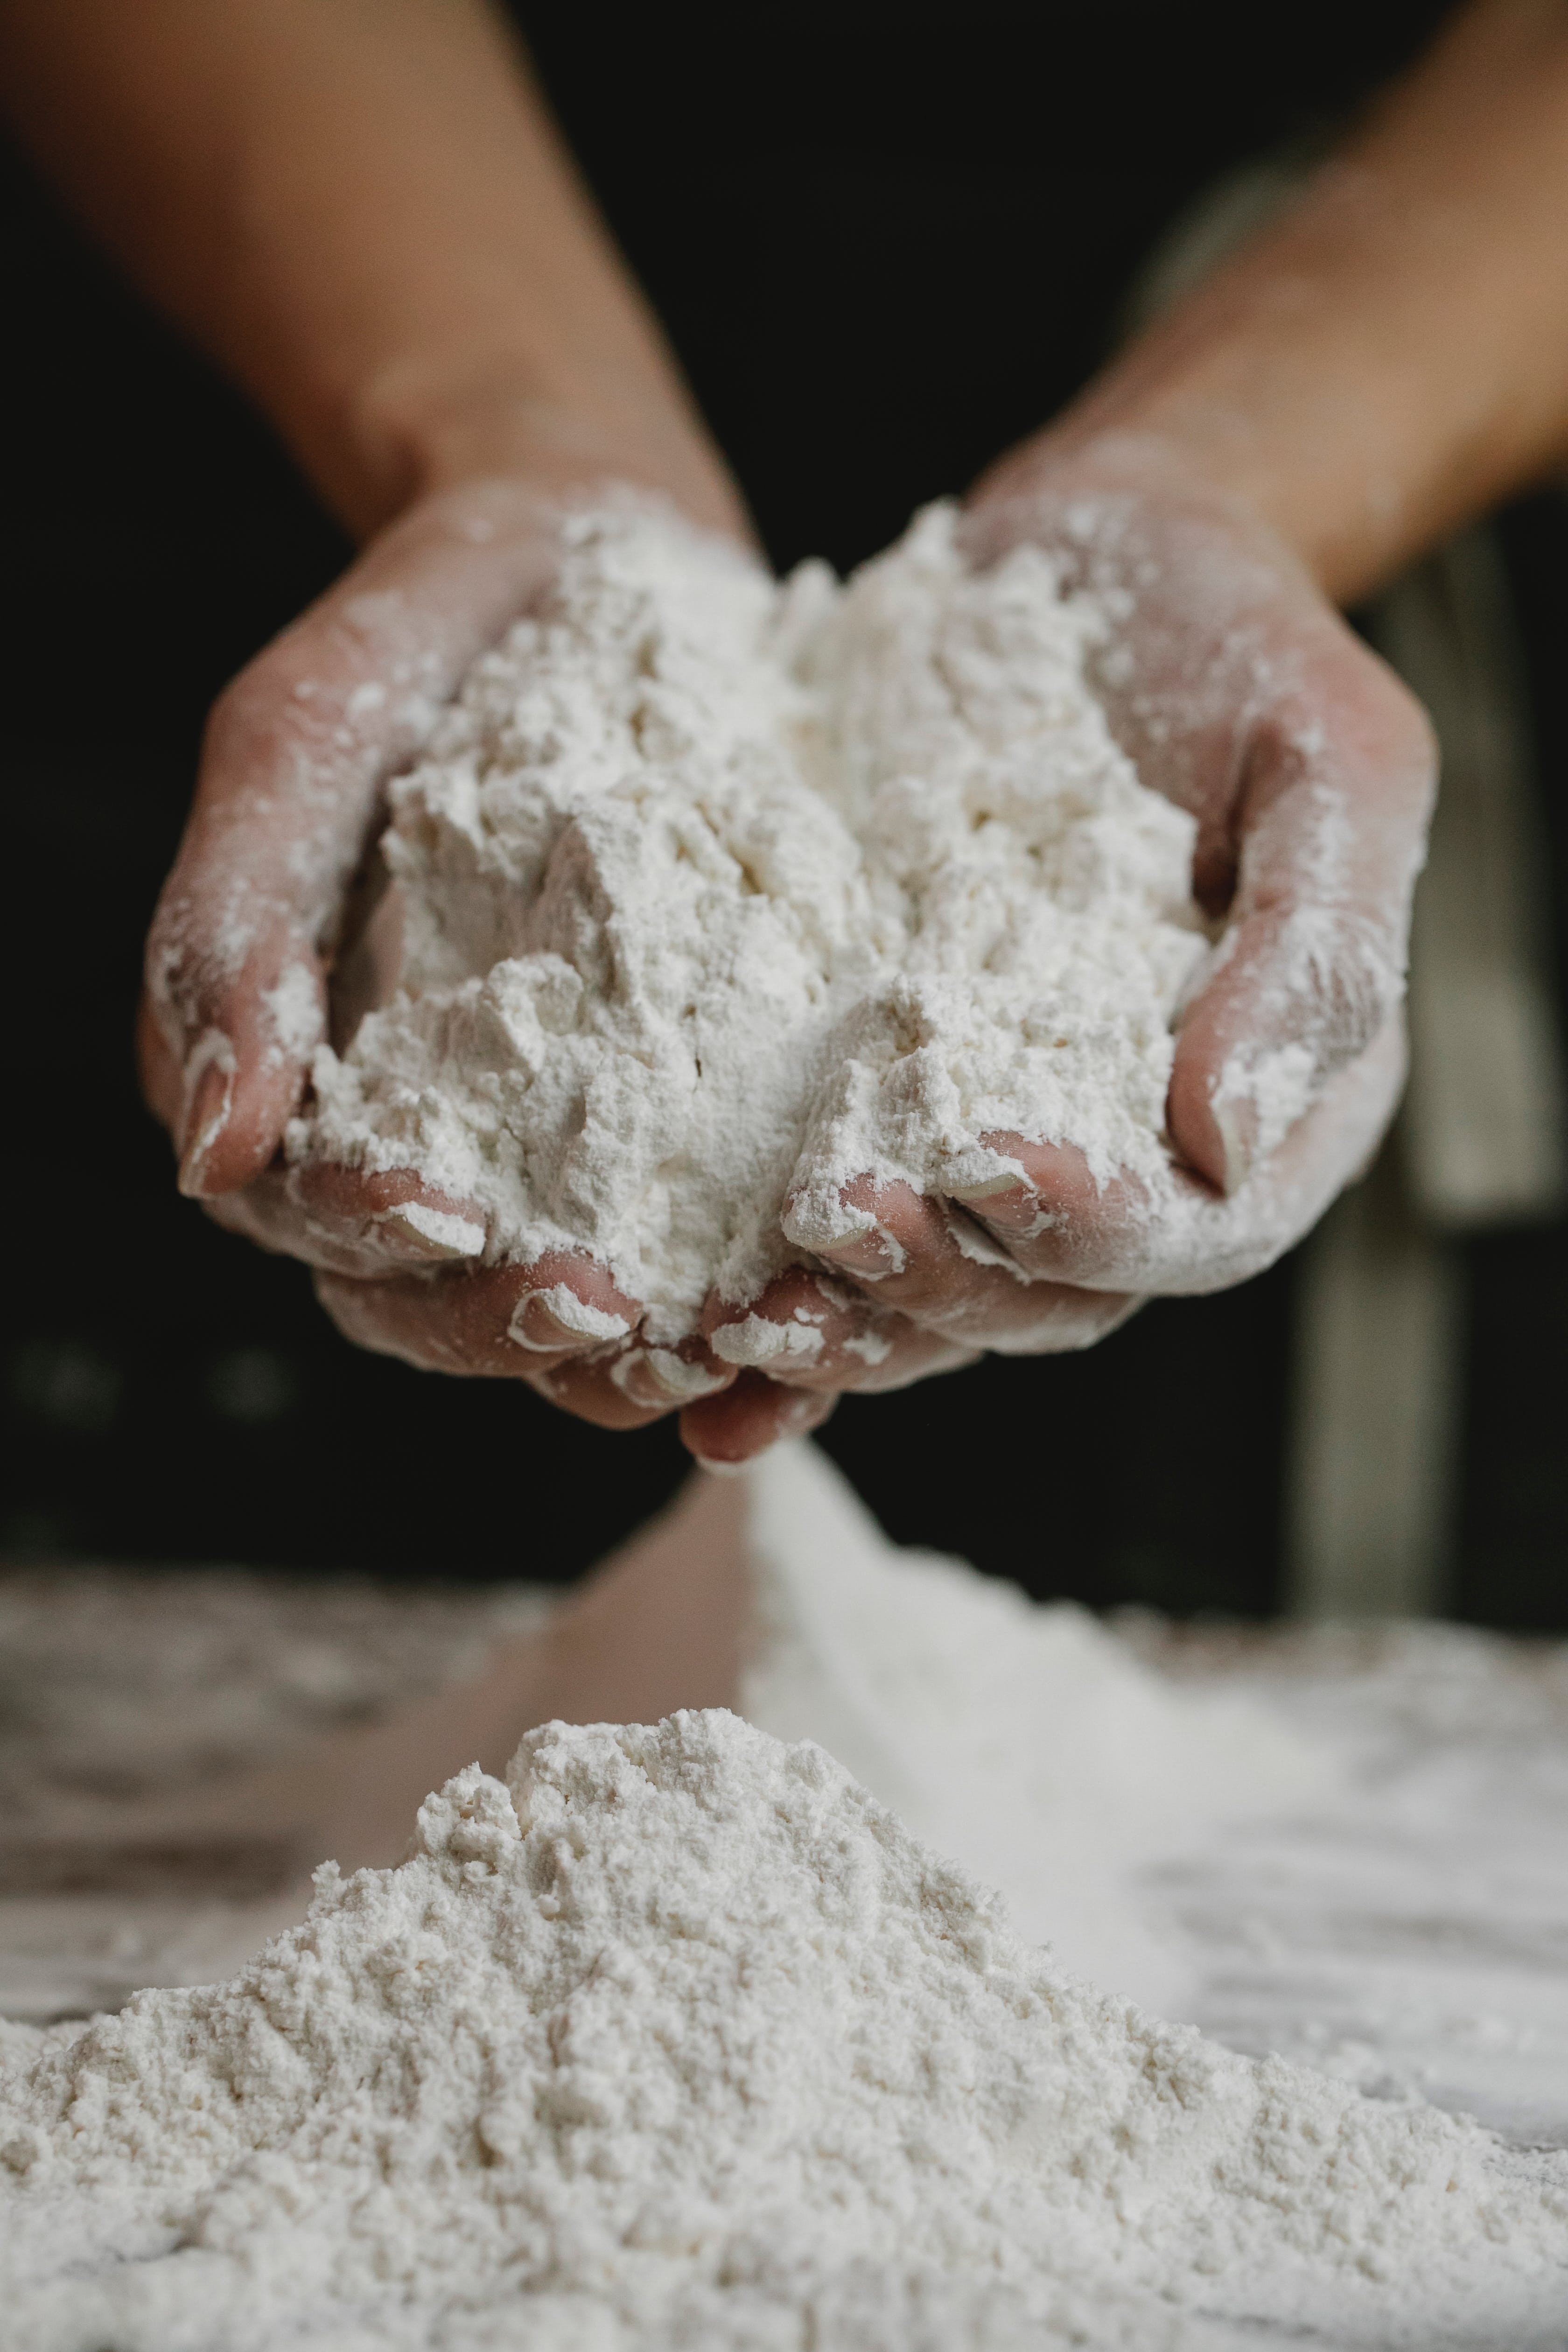 Combine cornstarch with baking soda to neutralize odors and leaving it for around an hour before vacuuming. | Source: Pexels